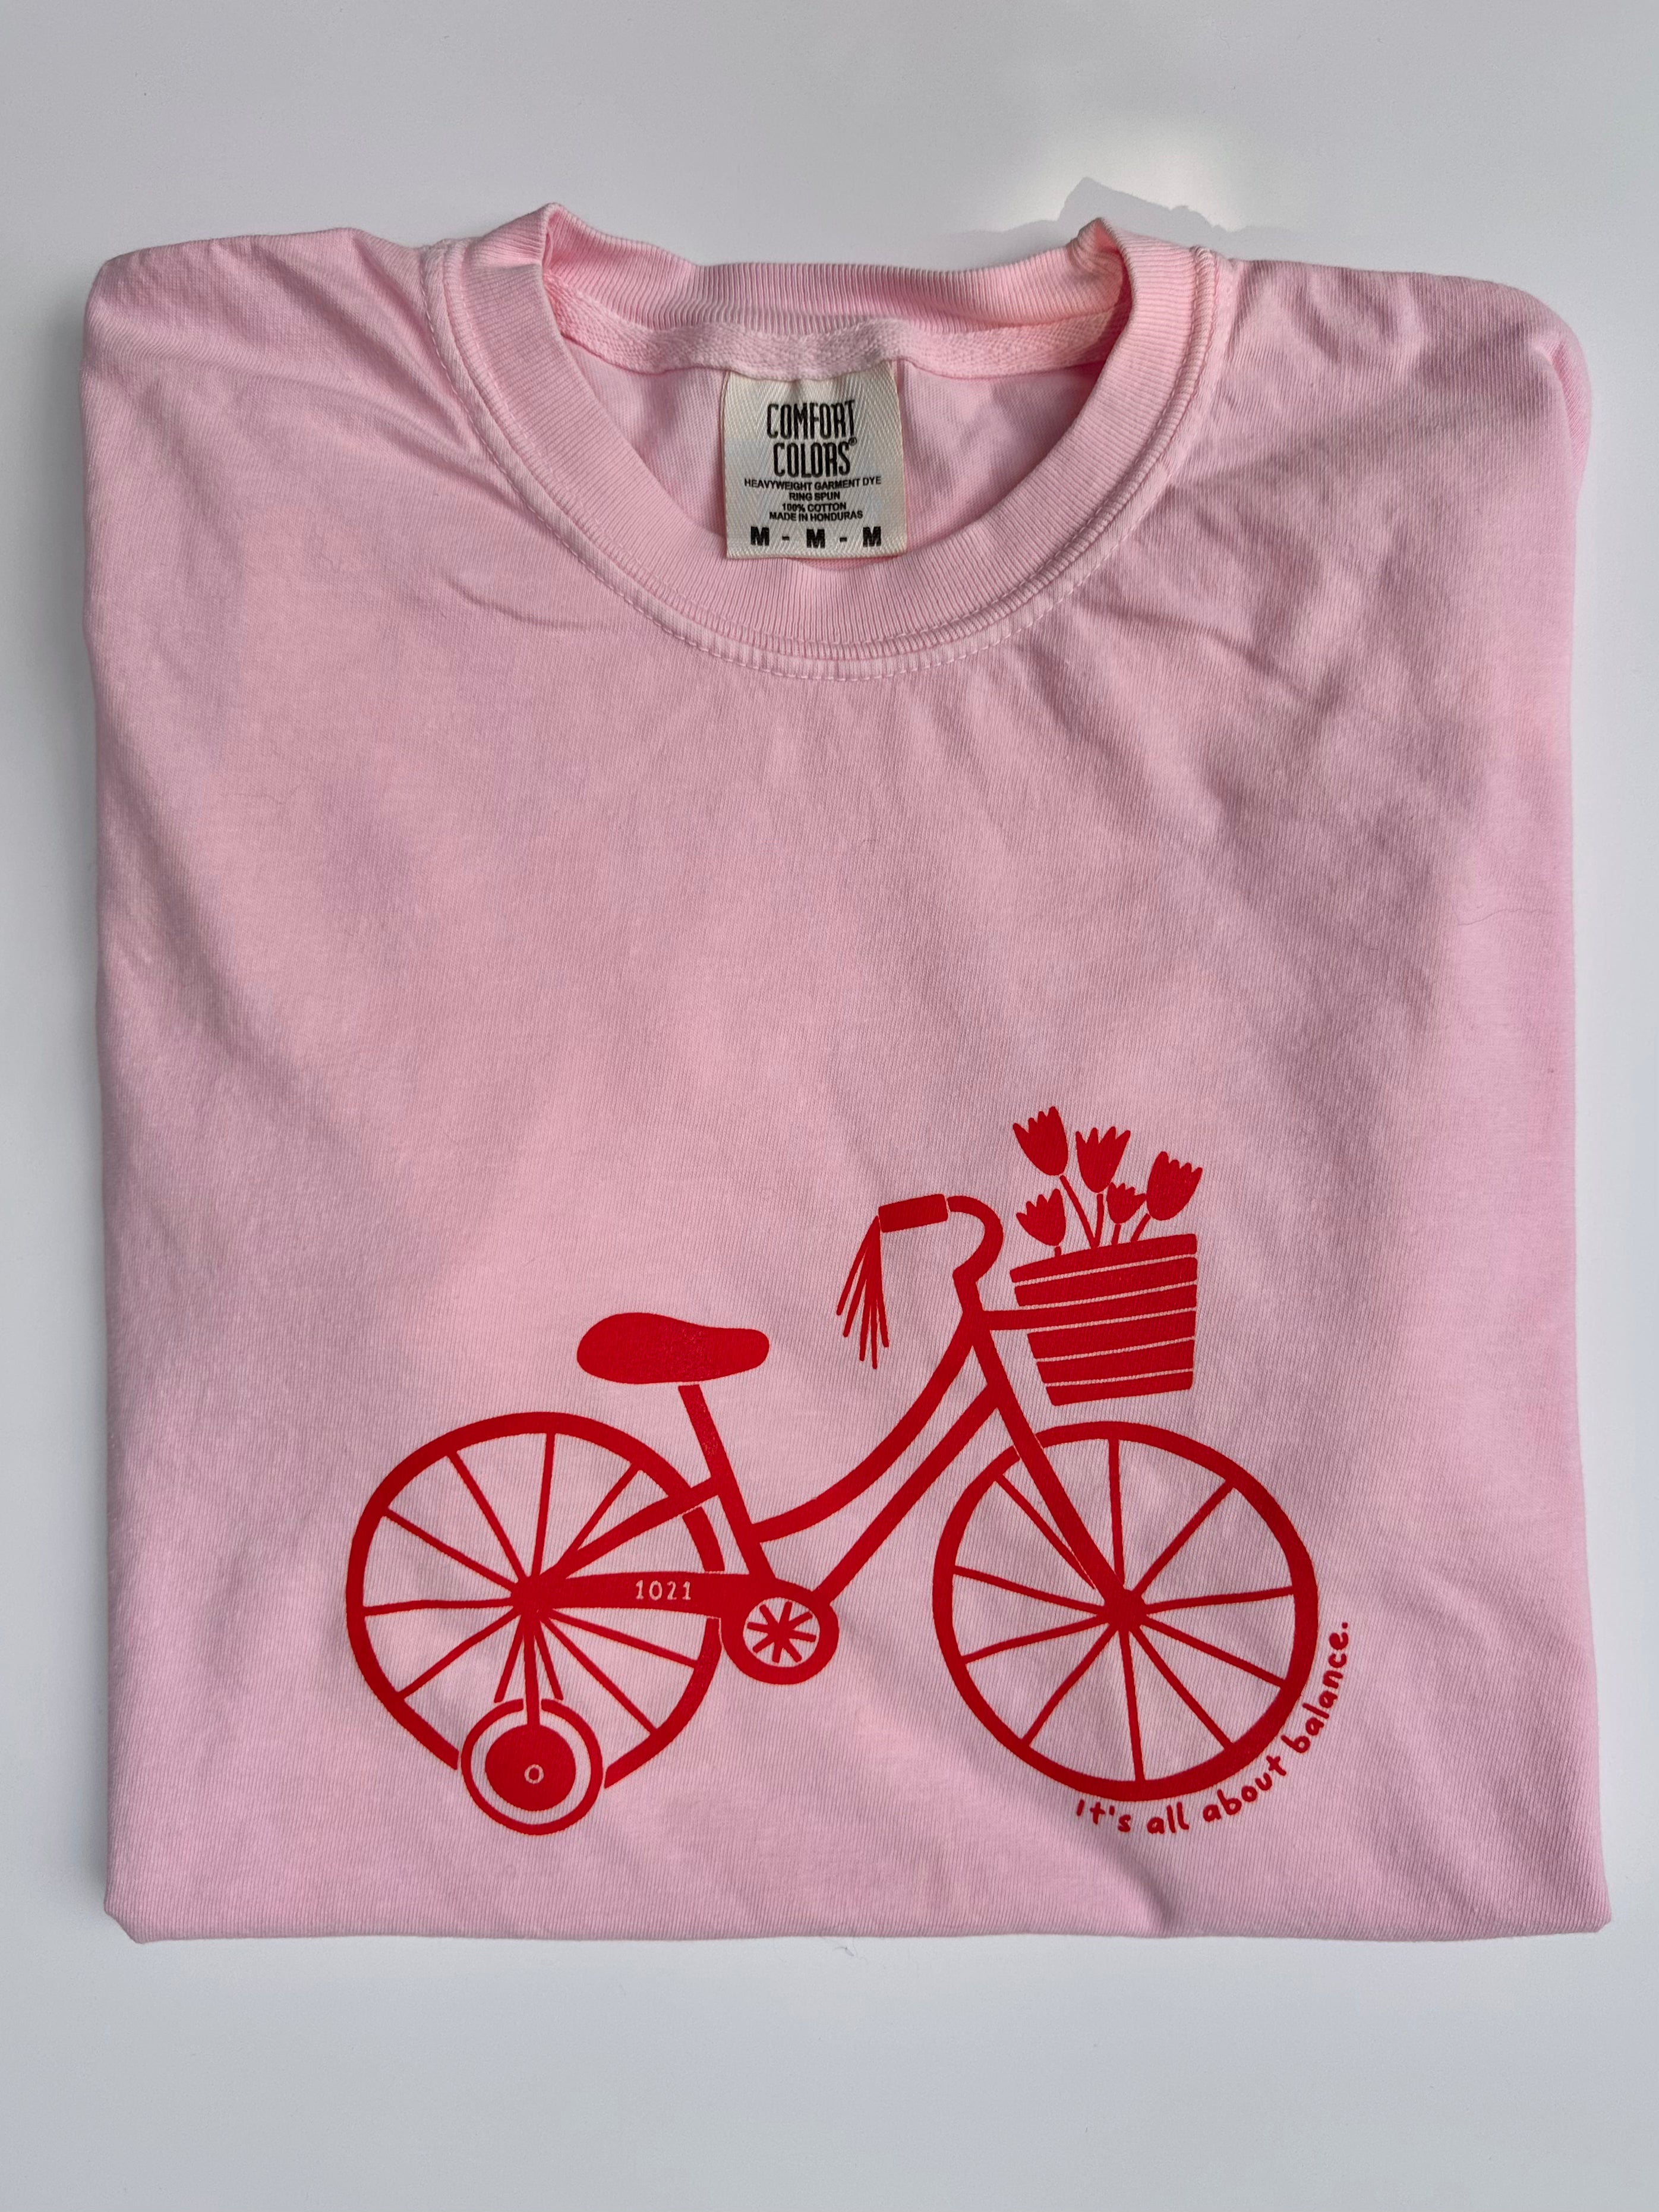 It's All About Balance Bike Tee